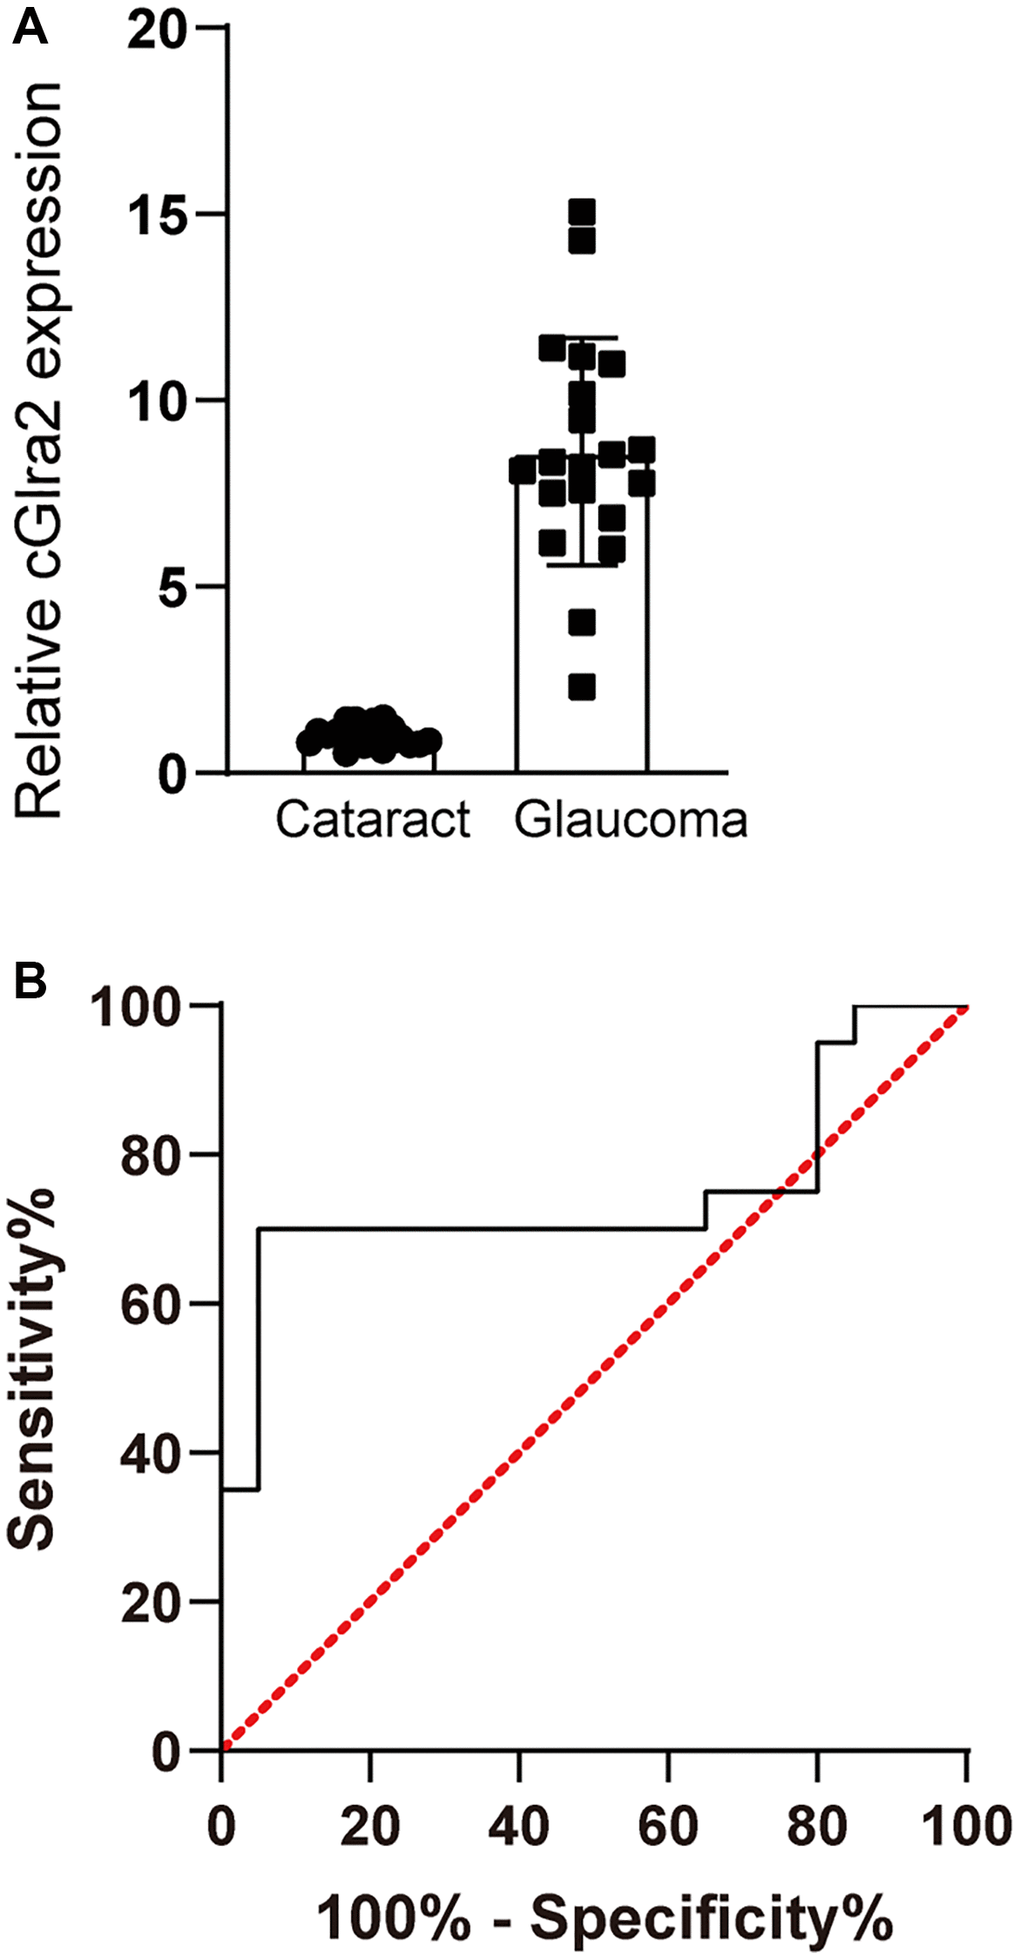 cGlra2 is shown as a potential biomarker for glaucoma. (A) AH samples were collected from glaucoma patients (n = 20) and cataract patients (n = 20). qPCR assays were conducted to detect the levels of cGlra2 expression. The significant difference was determined by Student’s t-test. (B) Receiver operating characteristic (ROC) analysis and AUC calculation was conducted to evaluate the diagnostic value of cGlra2.